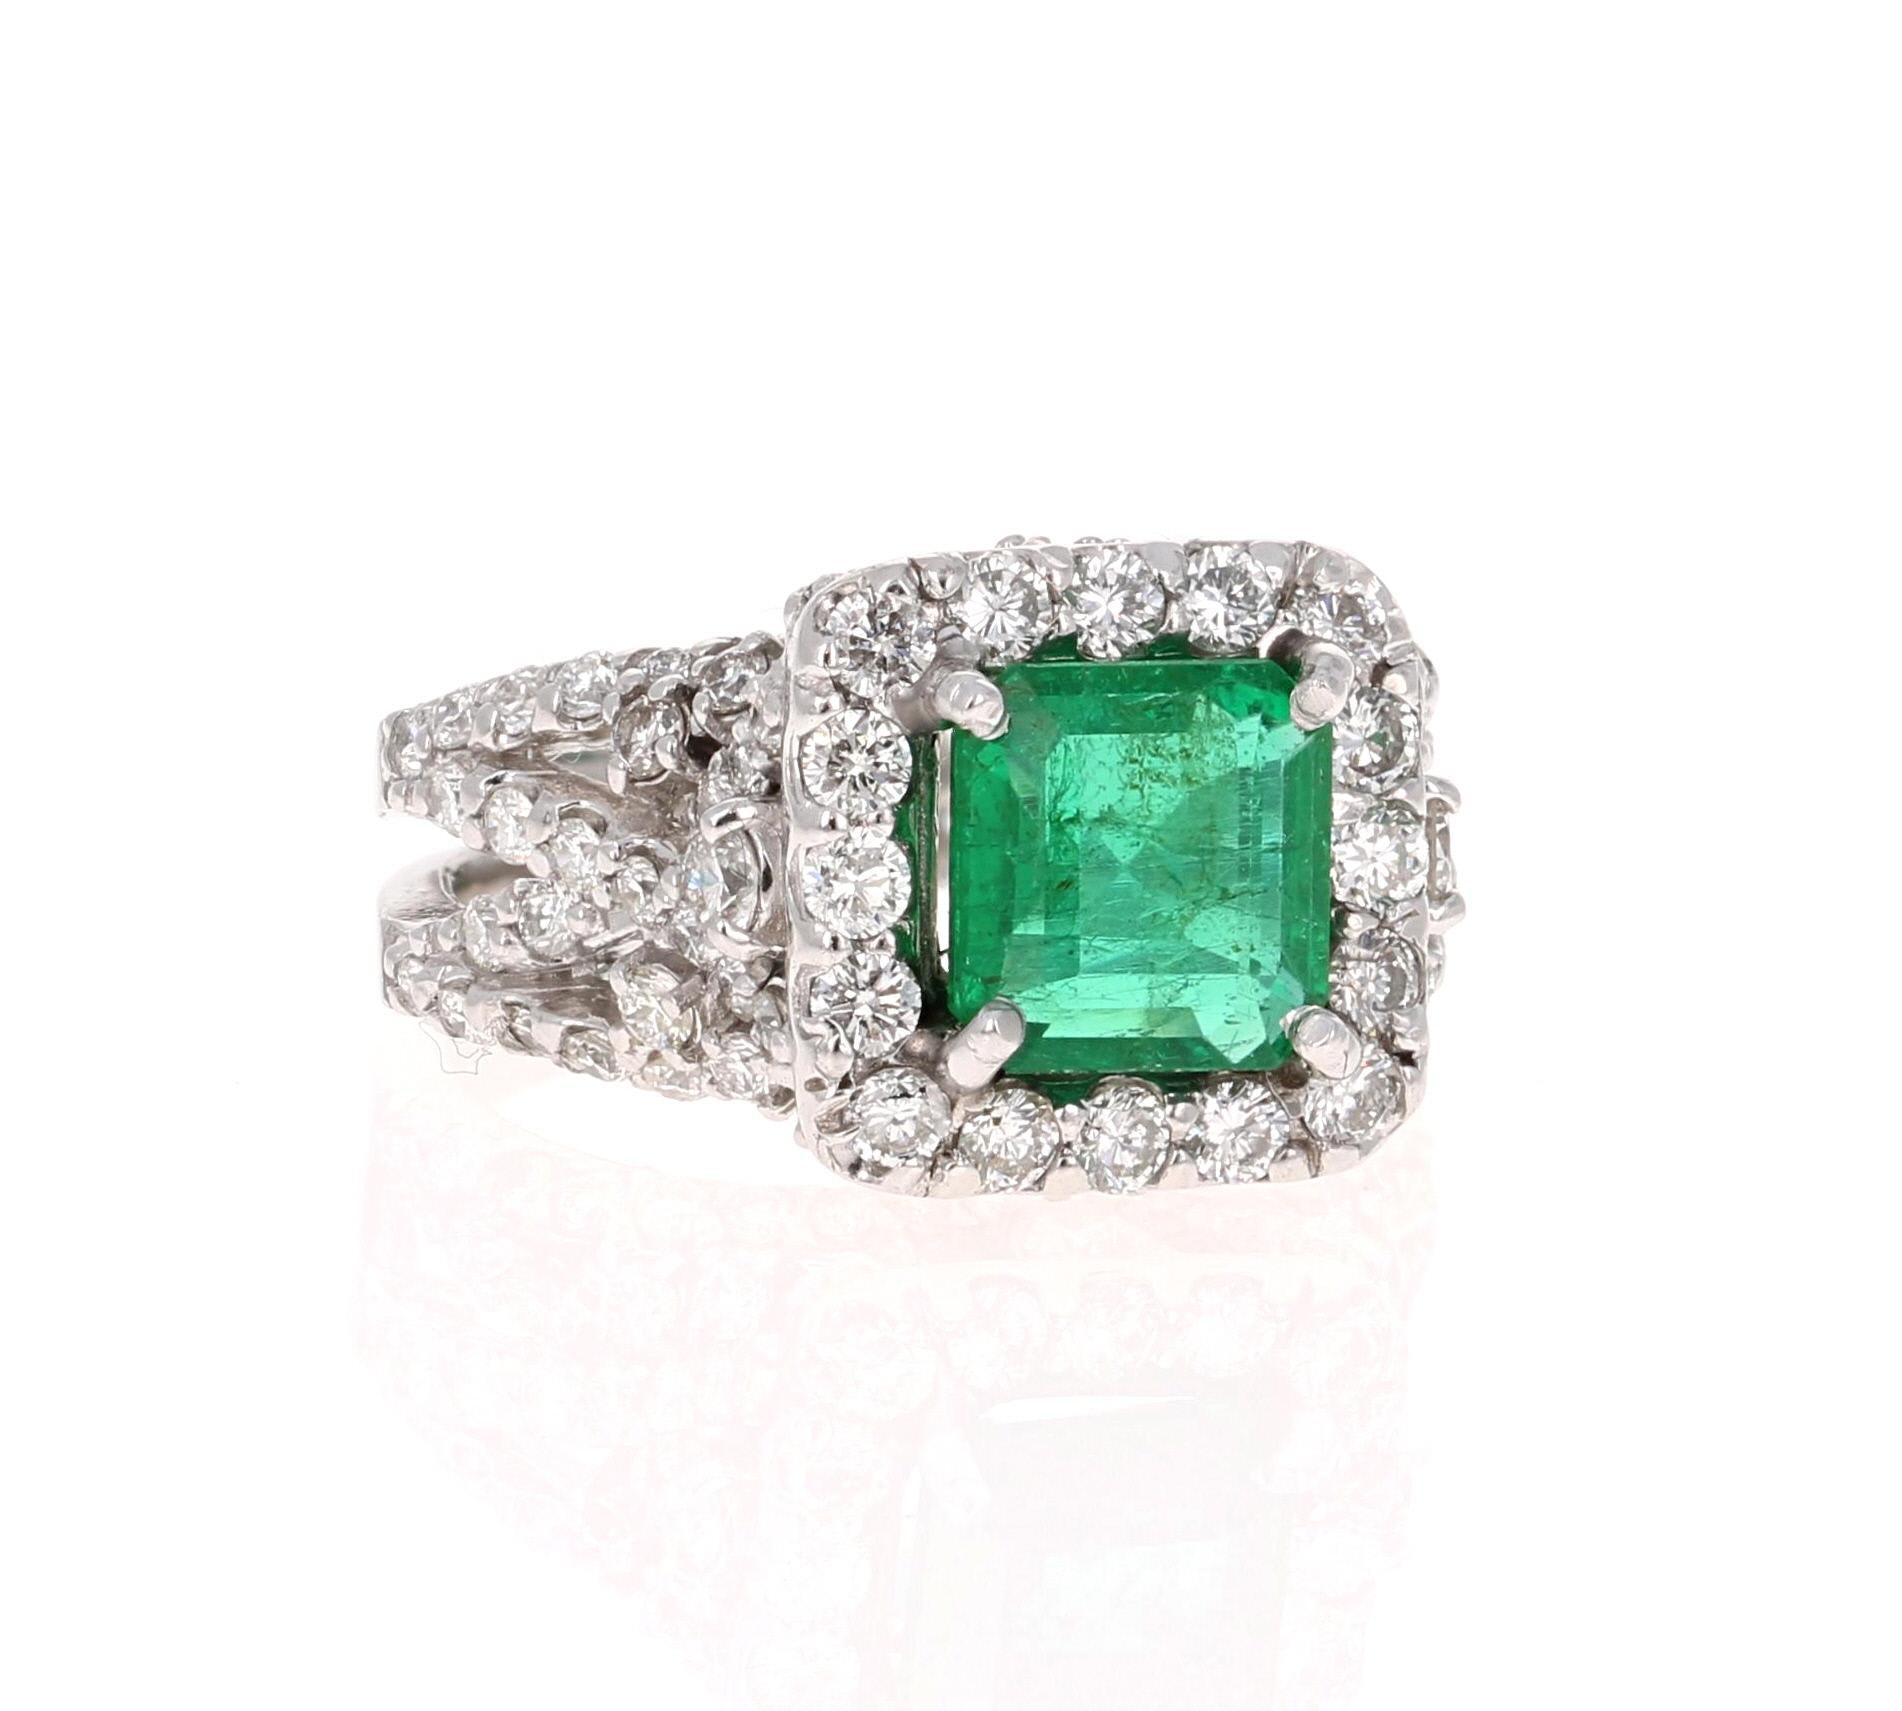 A beautiful modern classic setting holding a magnificent natural Emerald that weighs 2.02 carats.  This gorgeous ring also has 96 Round Cut Diamonds that weigh 1.52 carats.  The Clarity is SI  and the Color is F.  The total carat weight of the ring